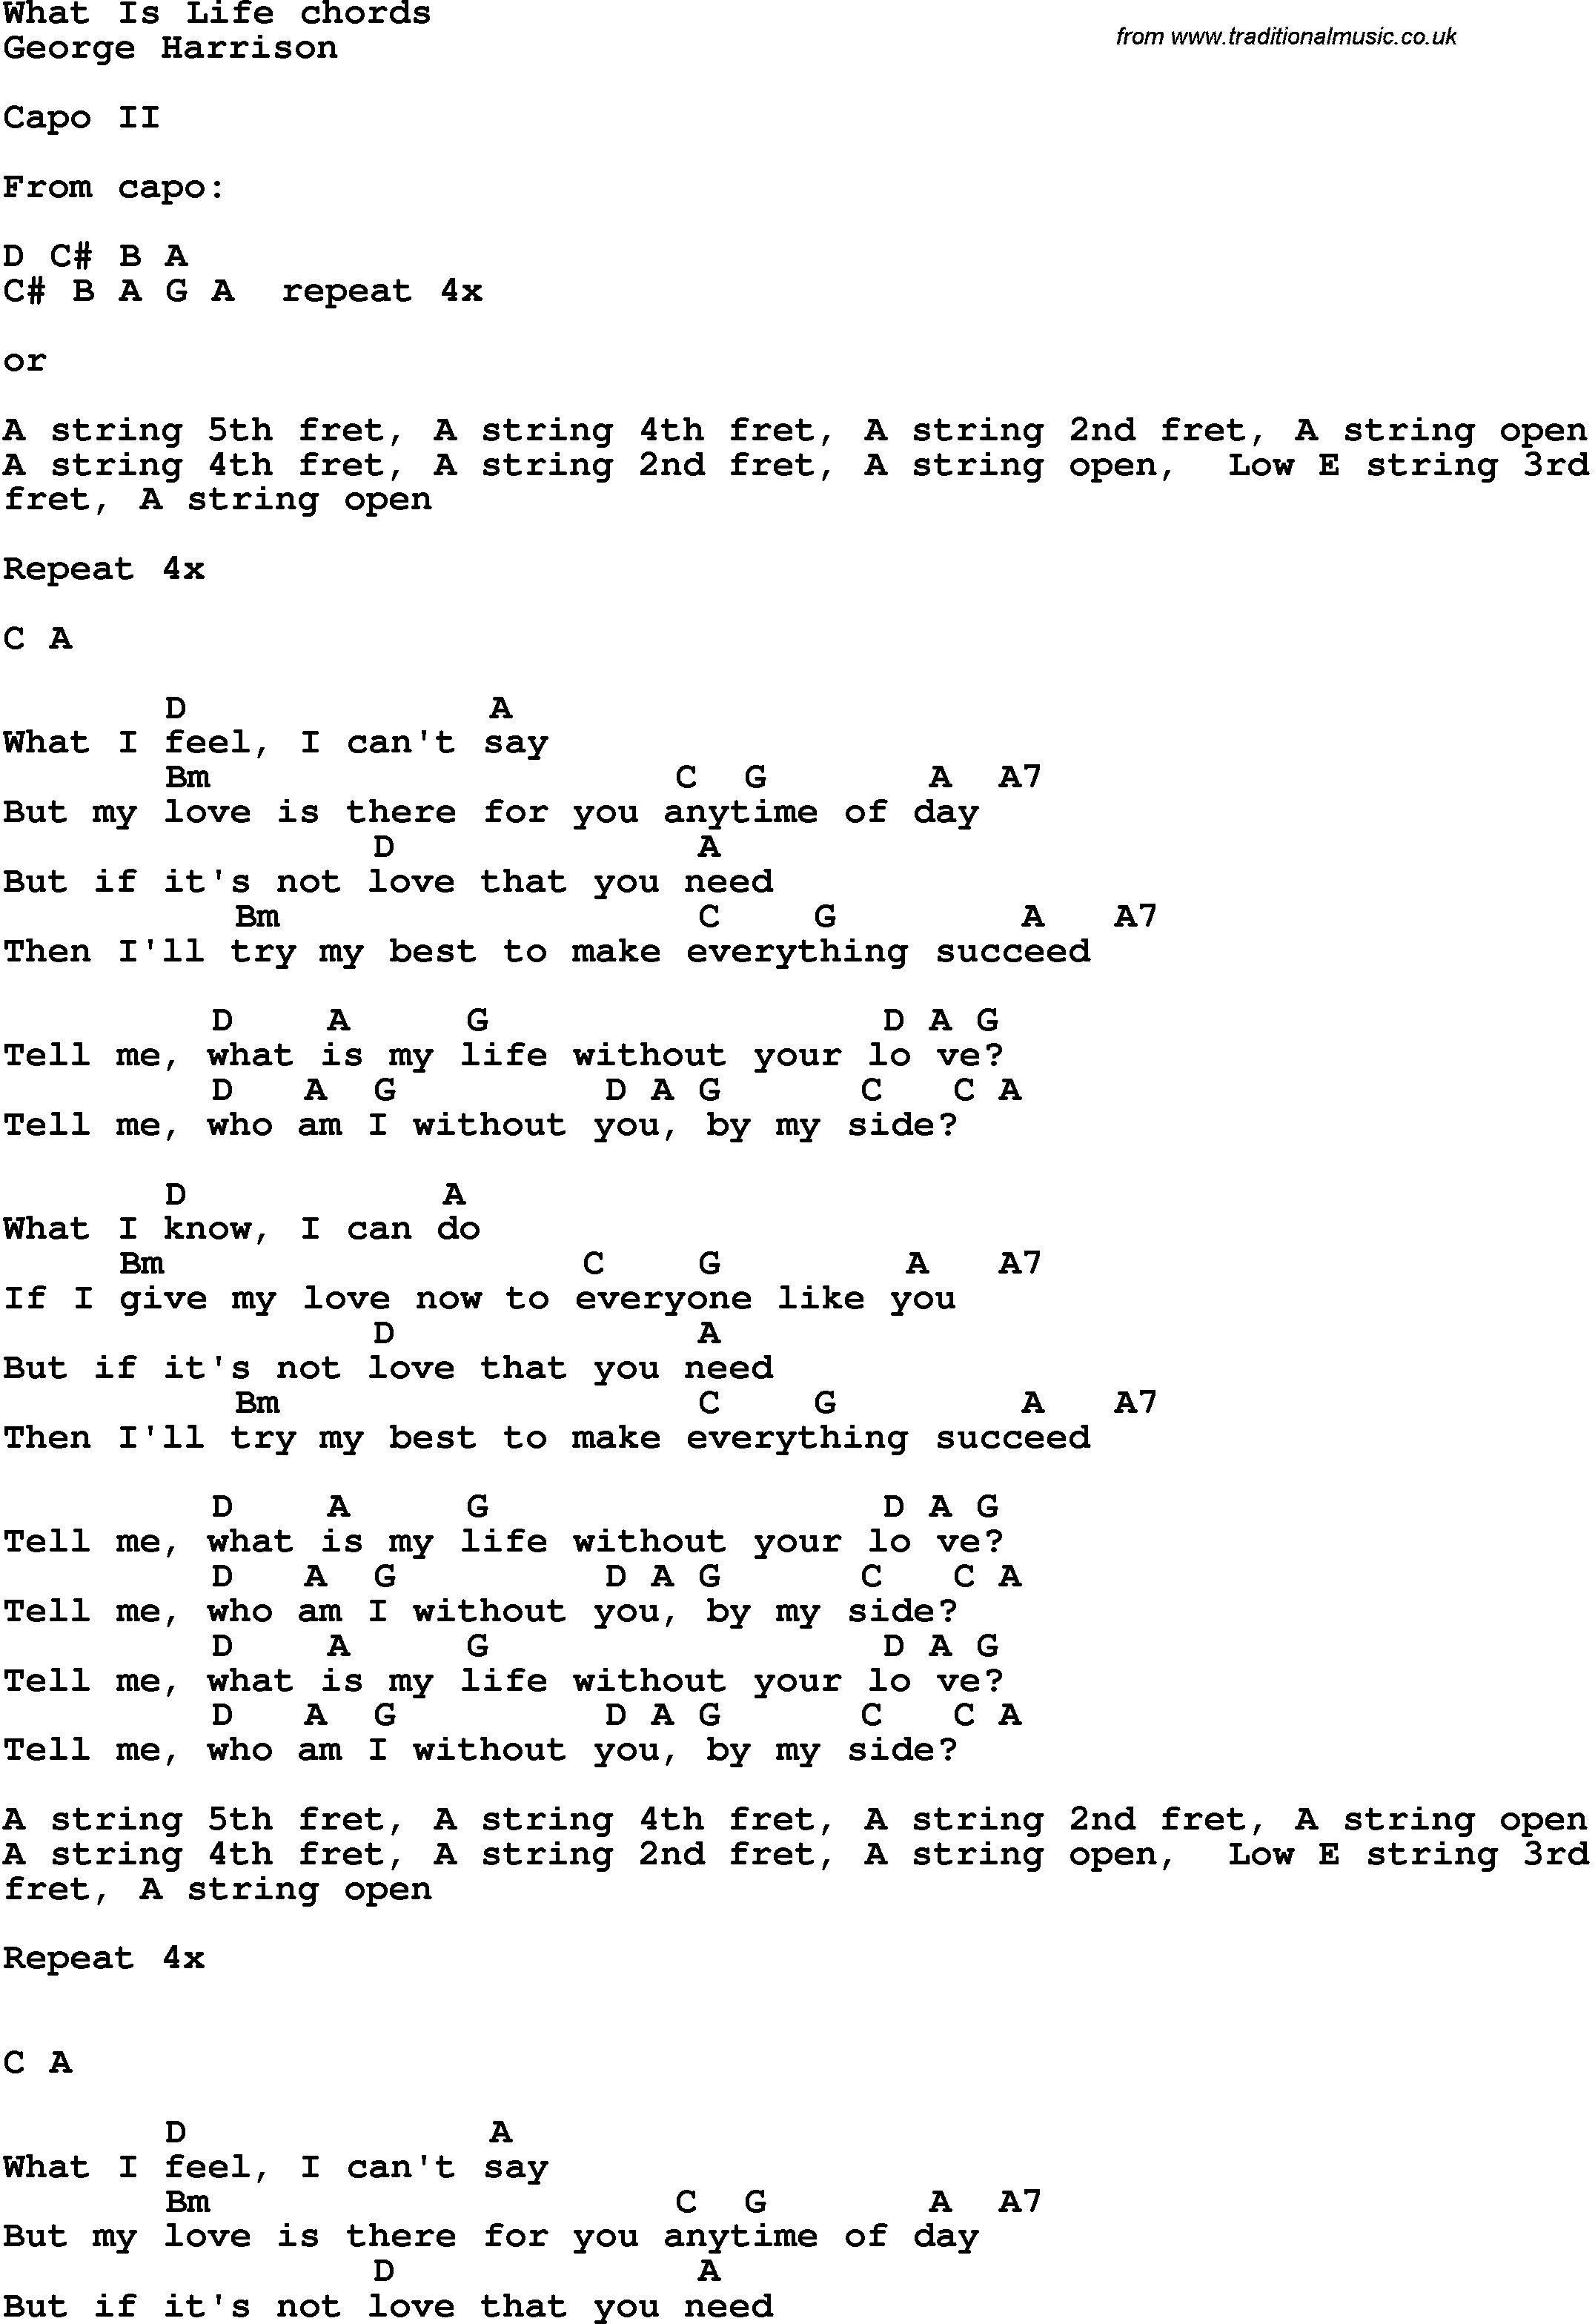 Song Lyrics with guitar chords for What Is Life